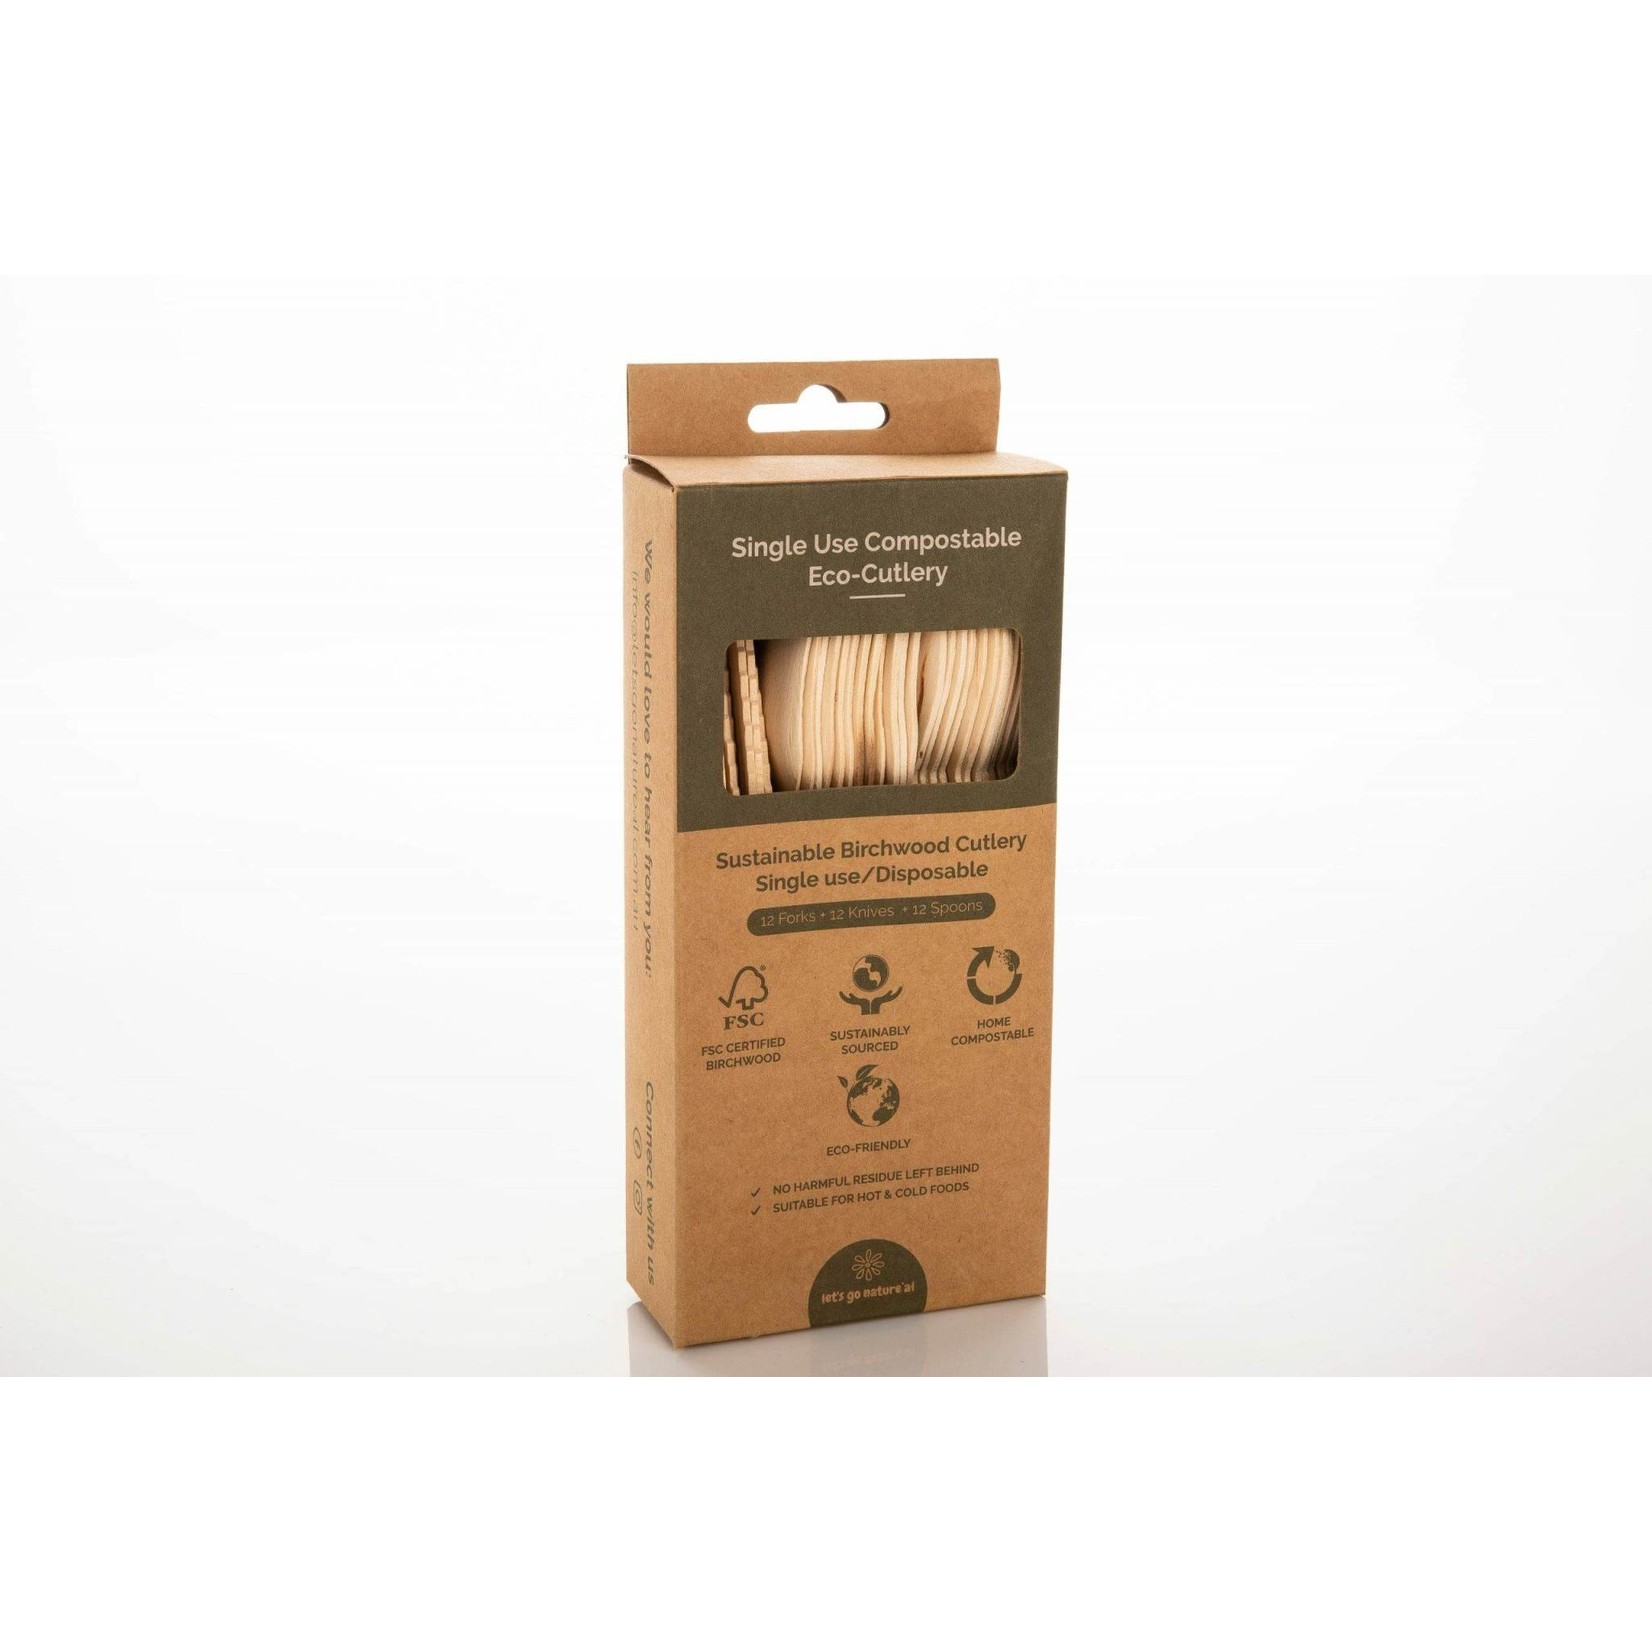 Let's Go Nature'al Let's Go Natureal Compostable Cutlery 36pk